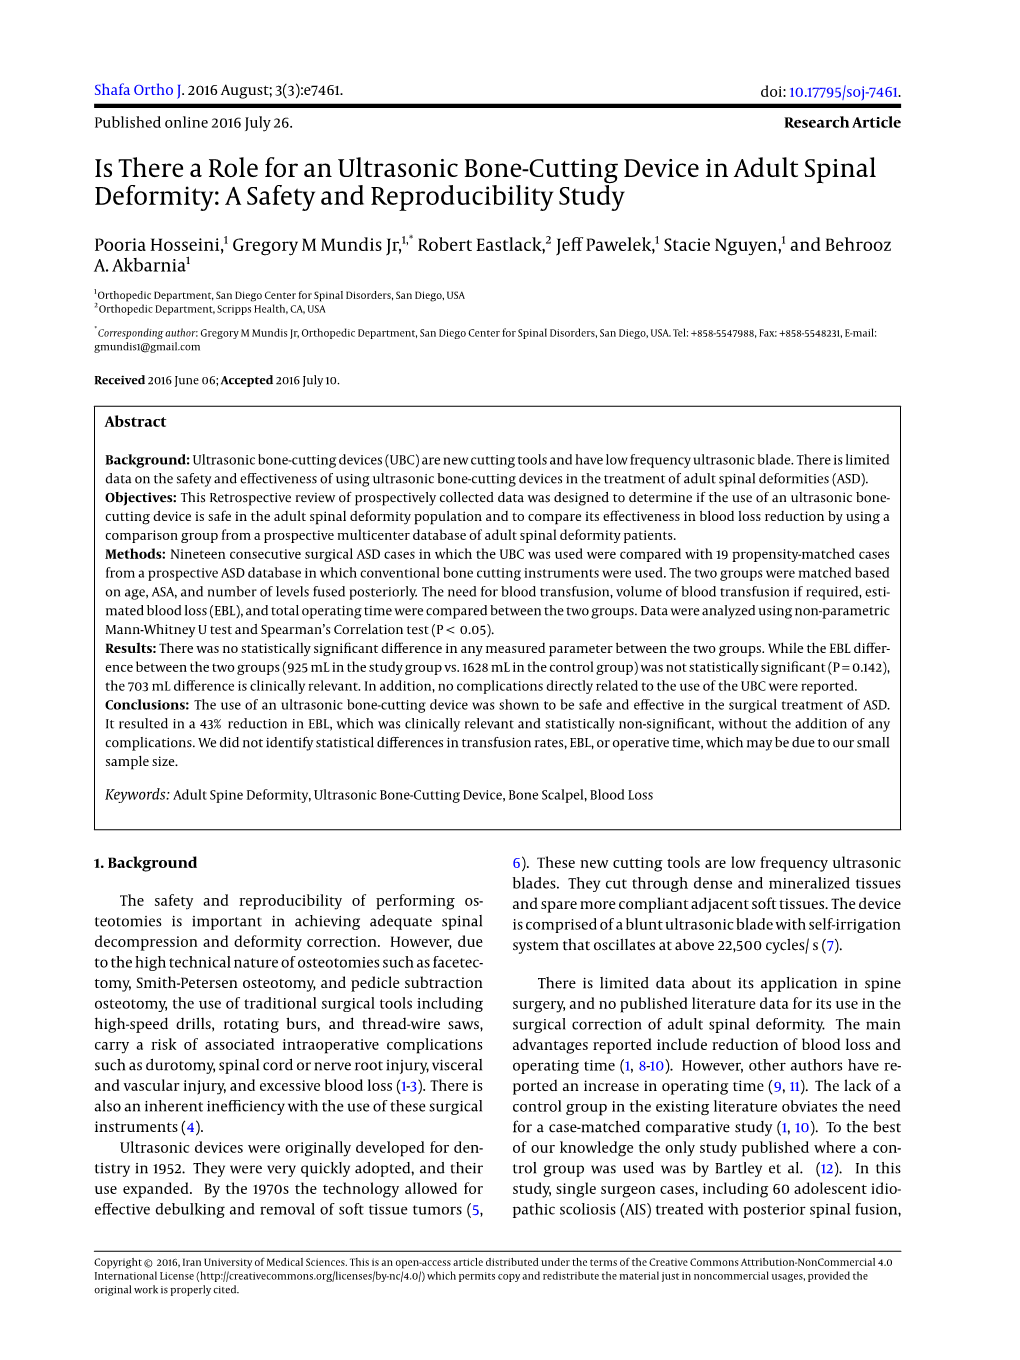 Is There a Role for an Ultrasonic Bone-Cutting Device in Adult Spinal Deformity: a Safety and Reproducibility Study